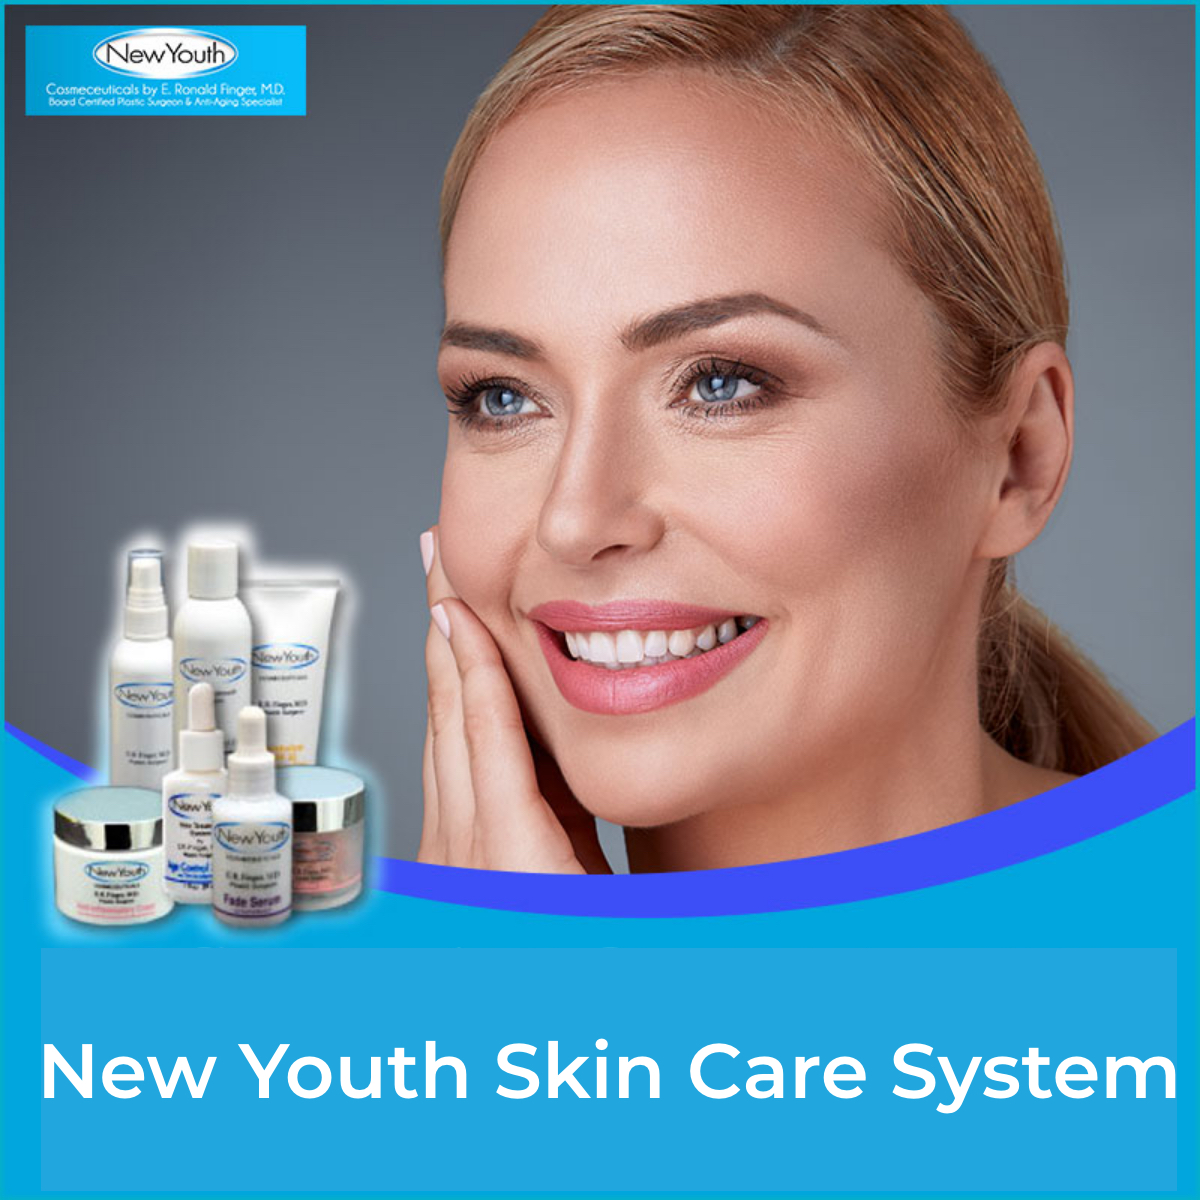 New Youth Skin Care System